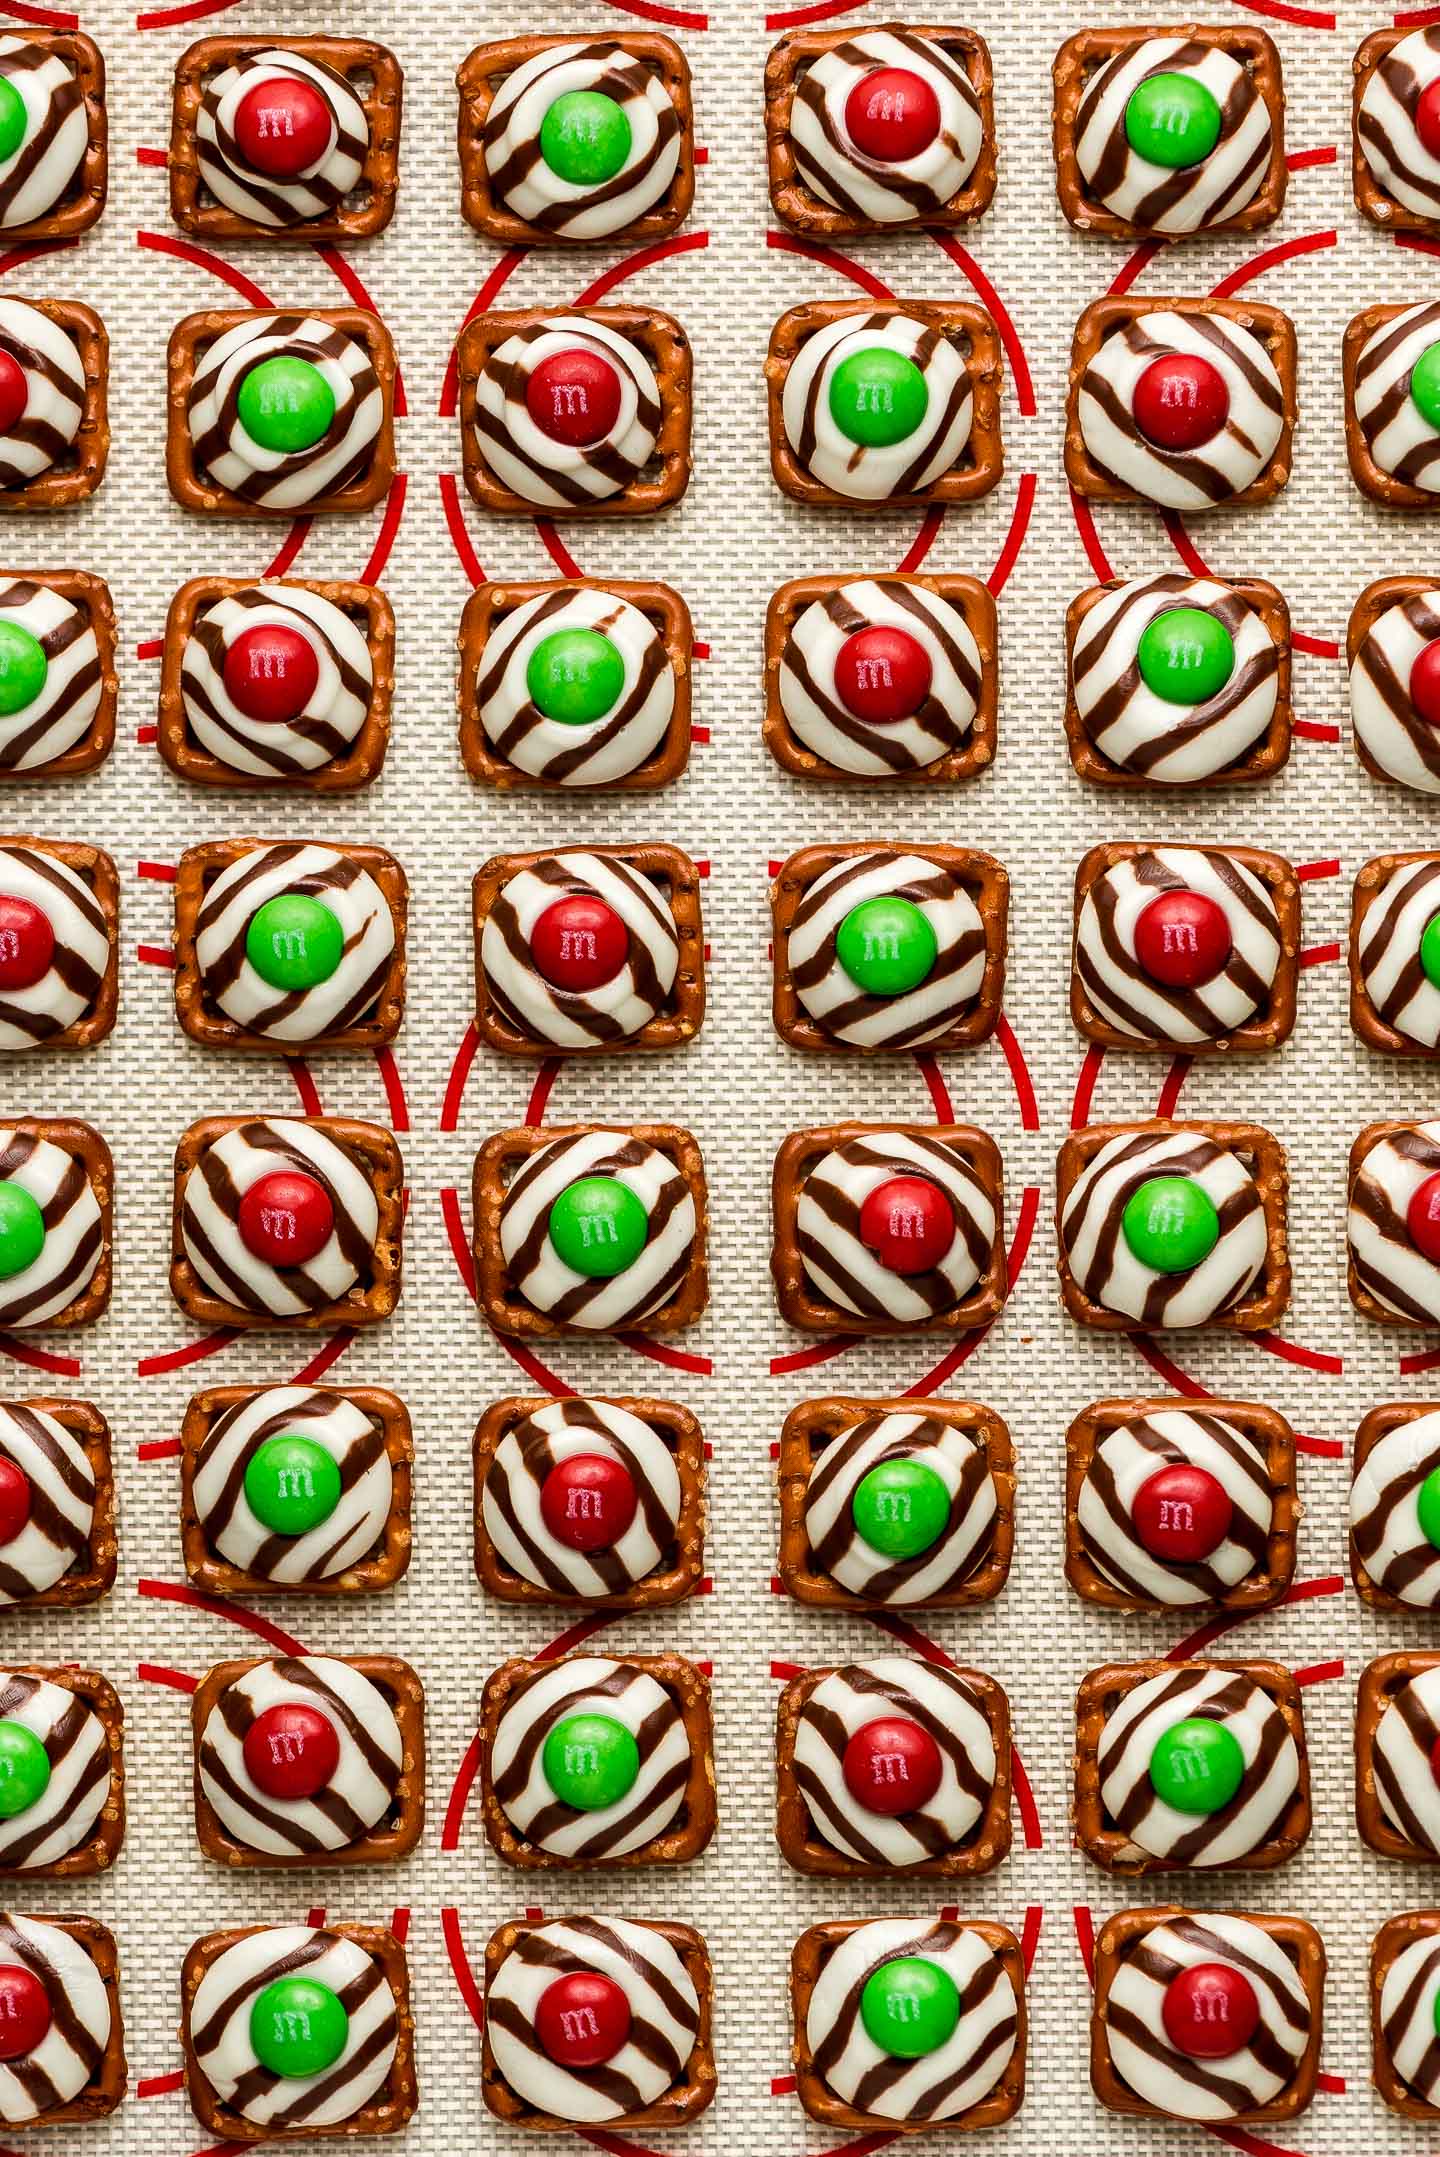 Square pretzels topped with a melted Hug and red & green M&M's